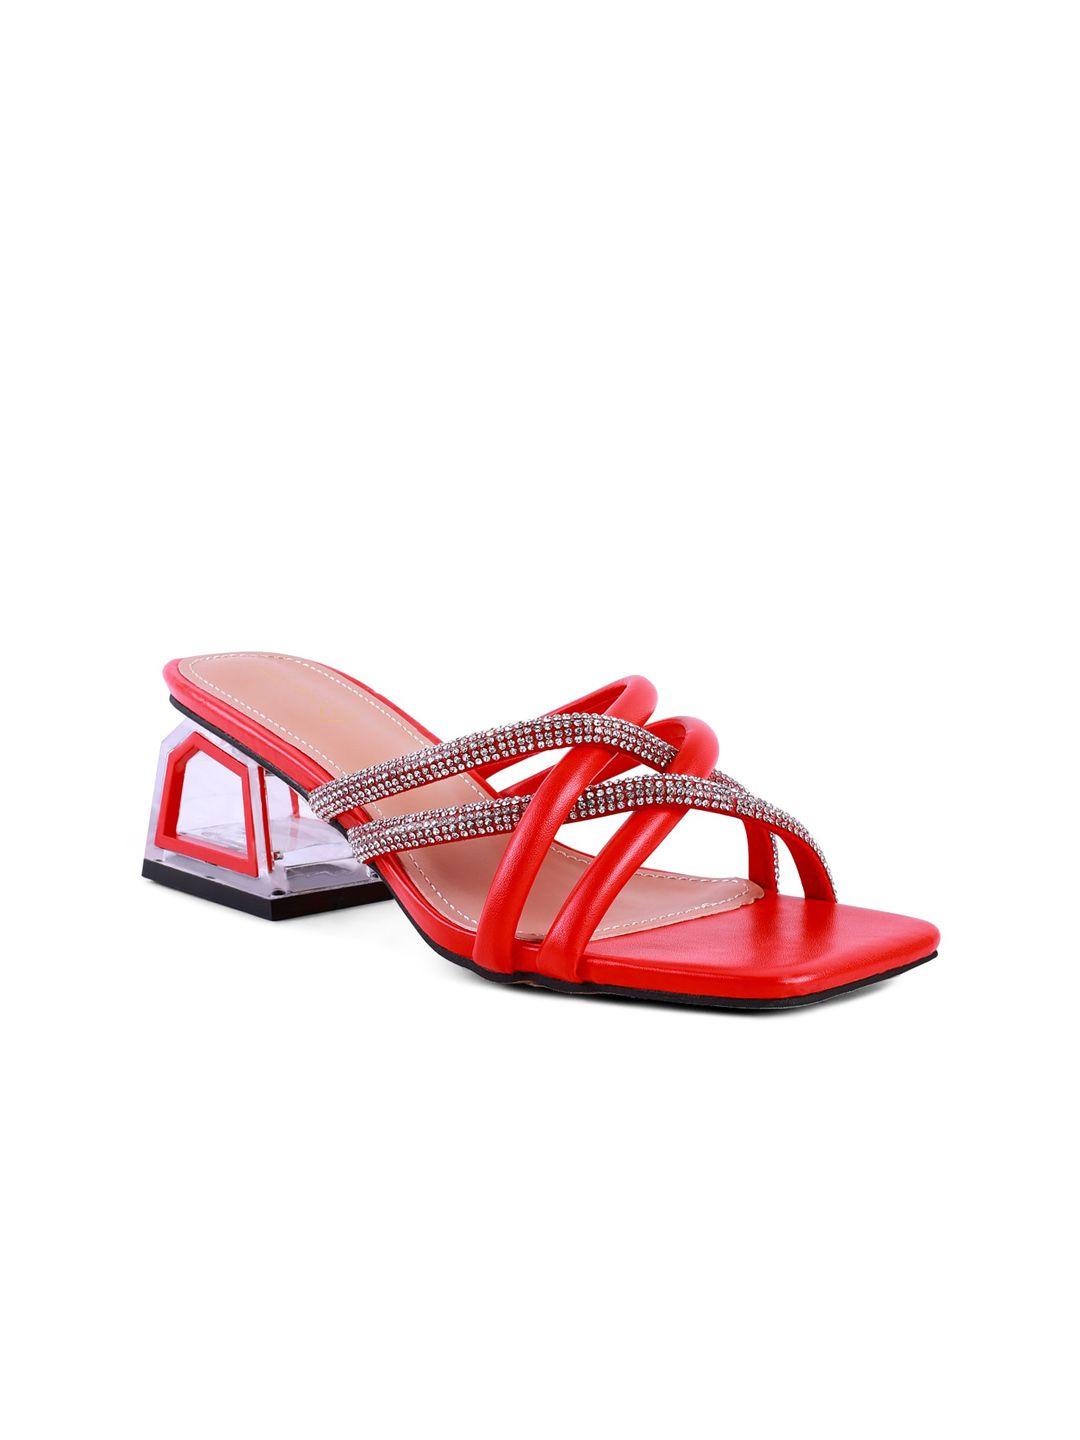 london rag women red embellished pu party block sandals